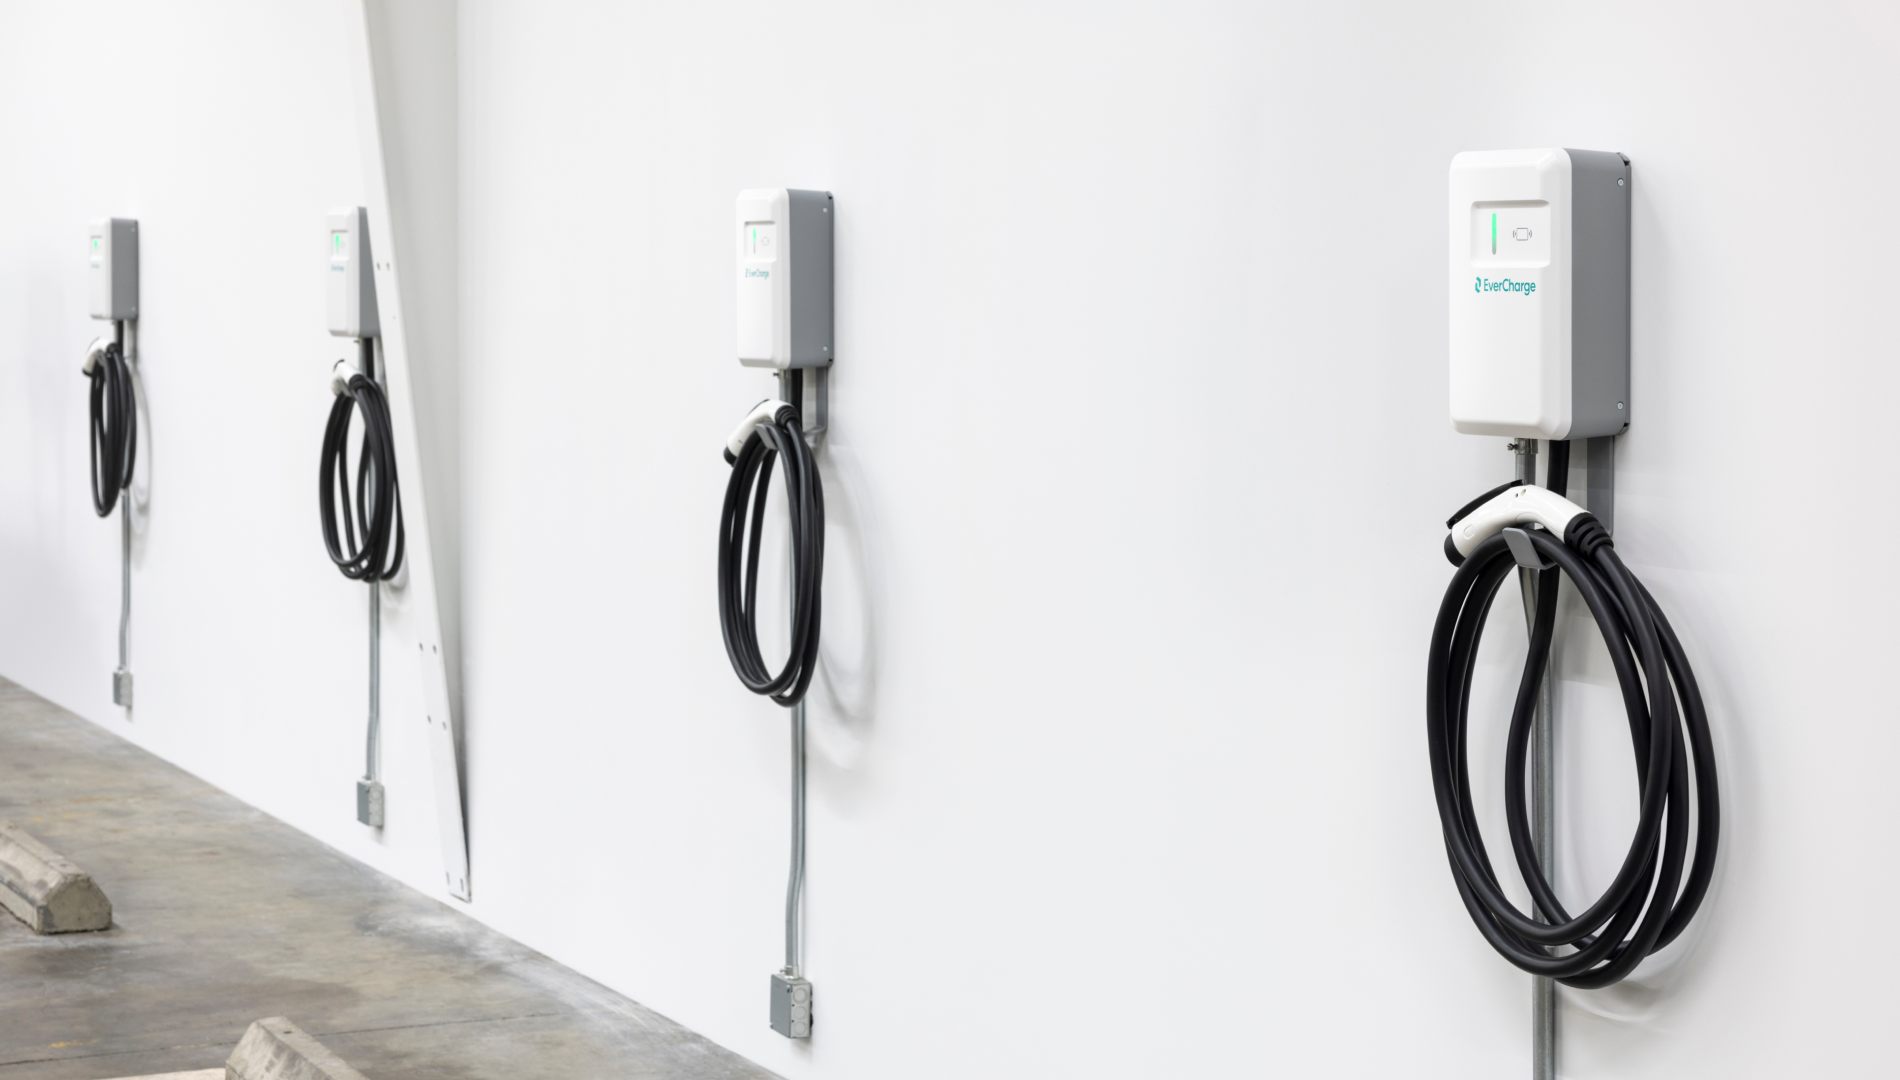 How to Maximize EV Charging Capacity and Minimize Electrical Upgrades